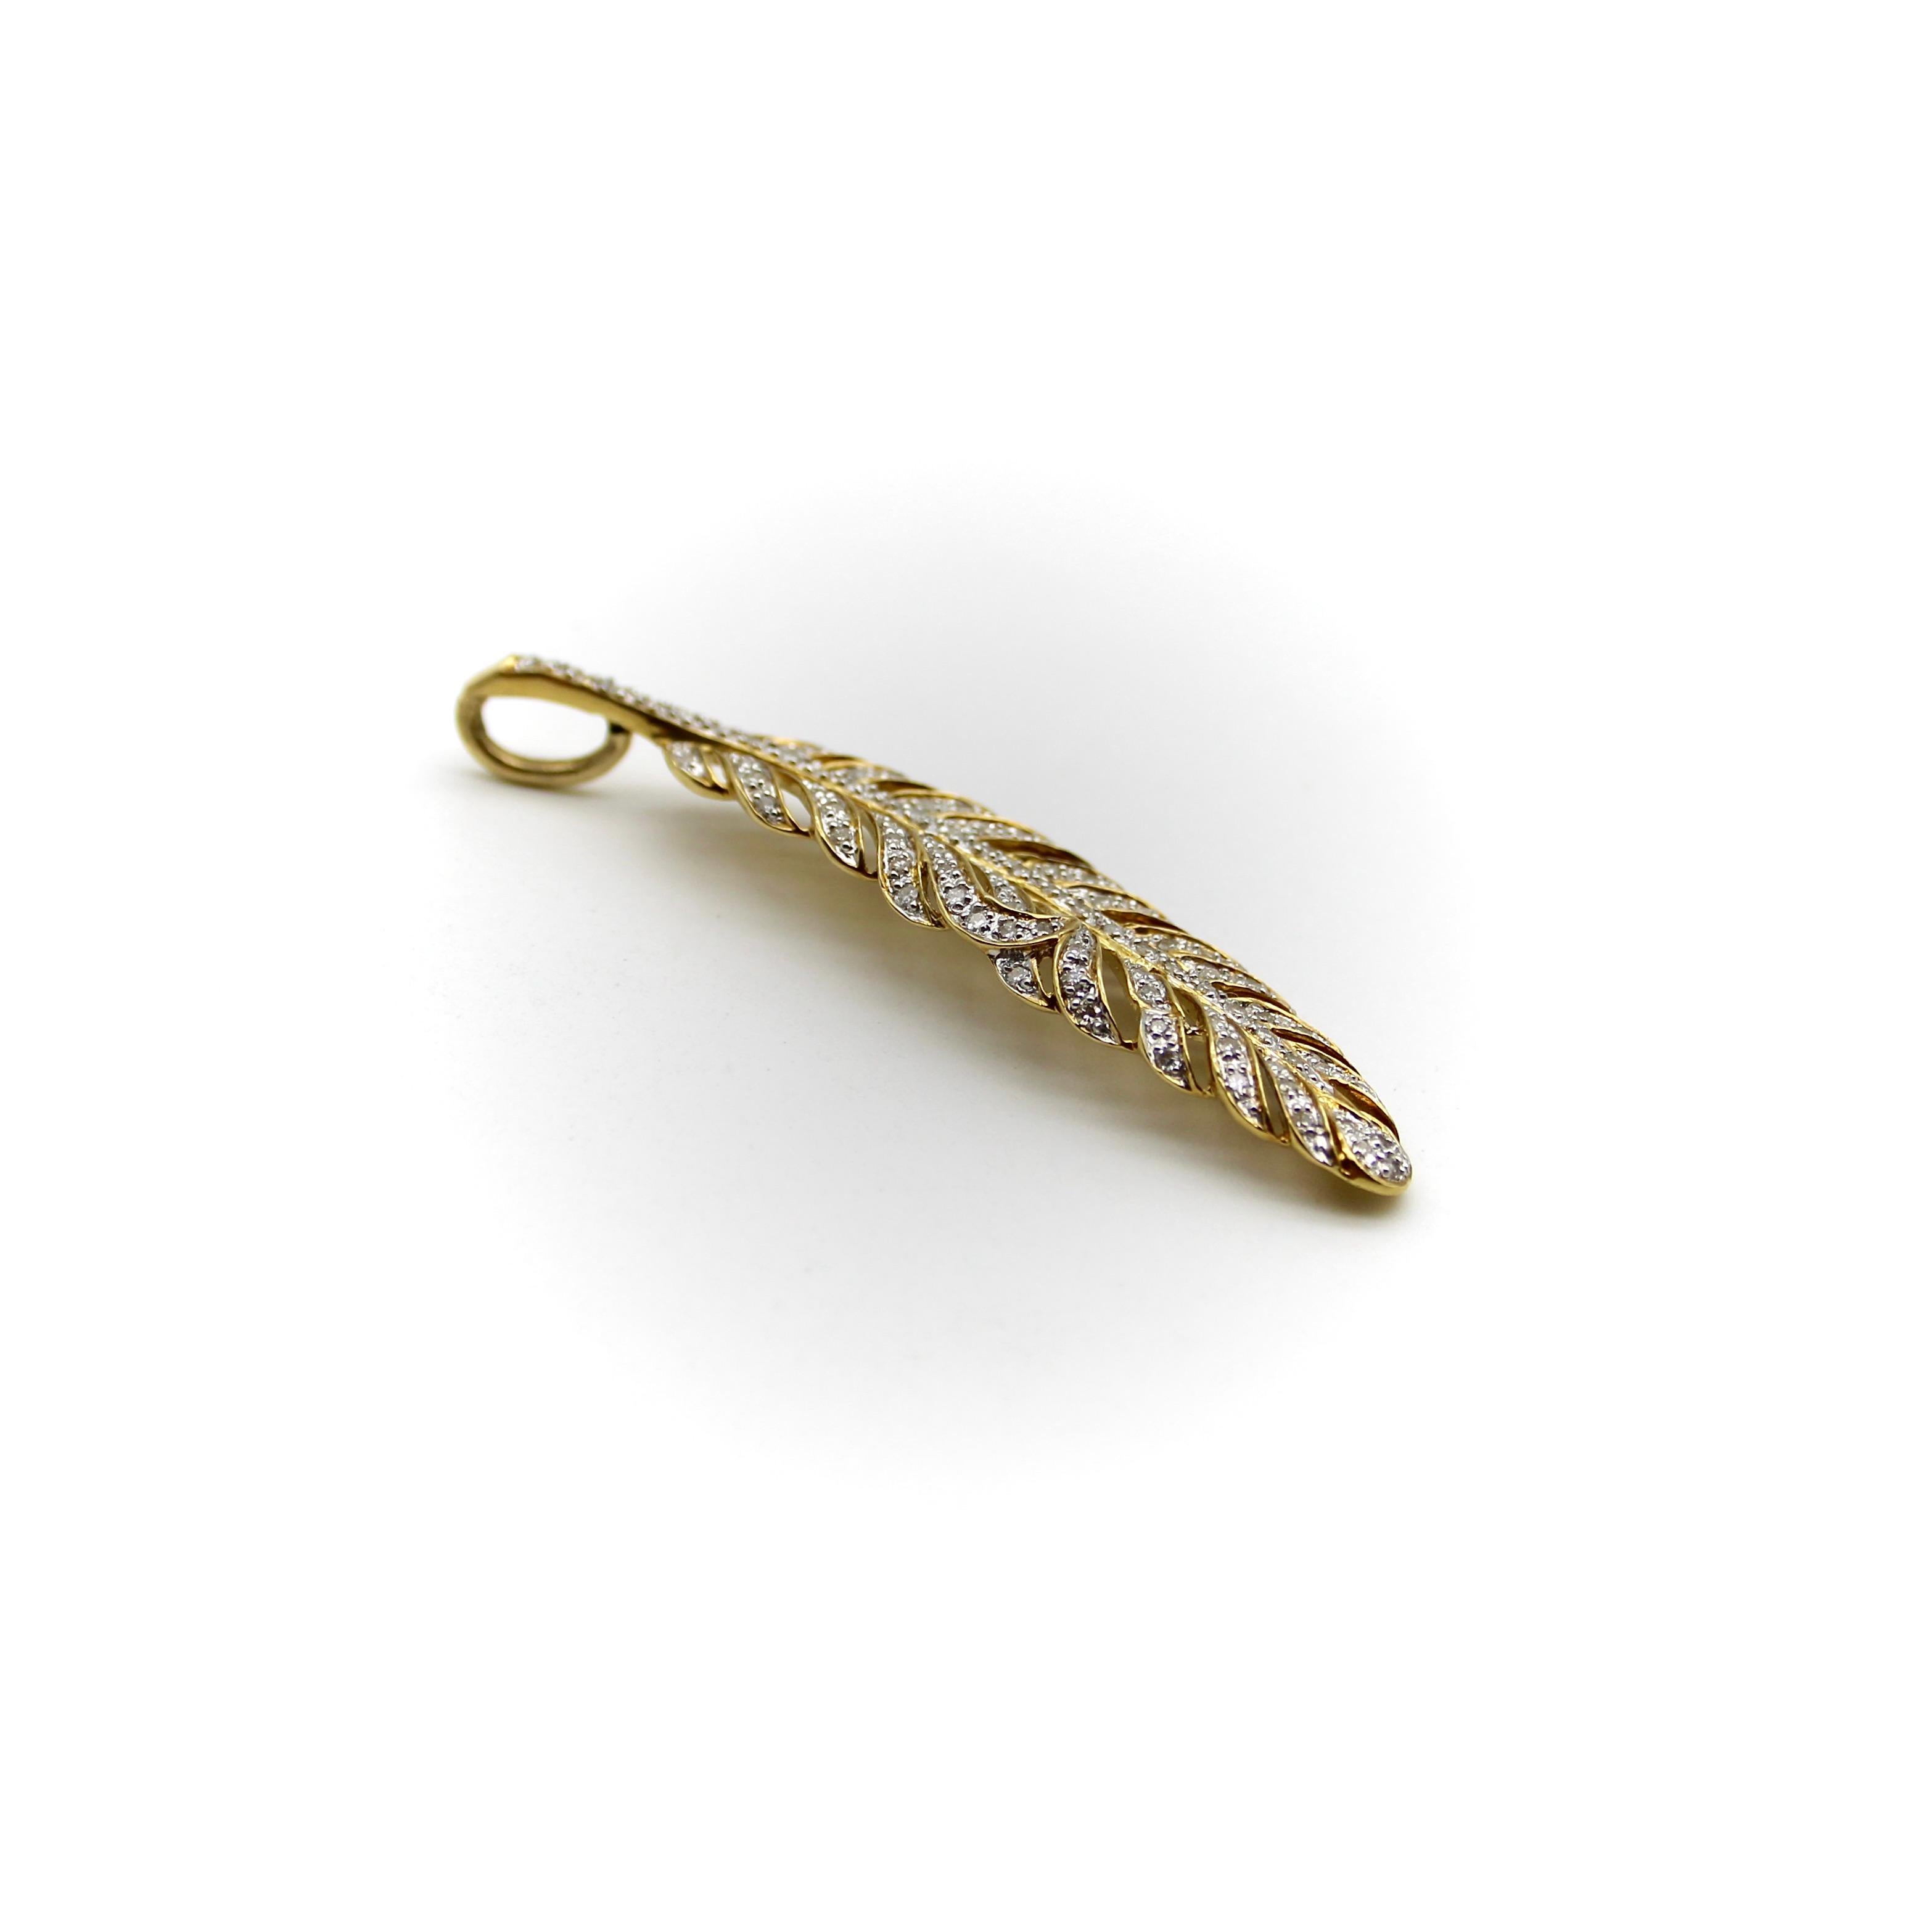 Modernist Vintage 18K Gold Feather Pendant with Pave Diamonds